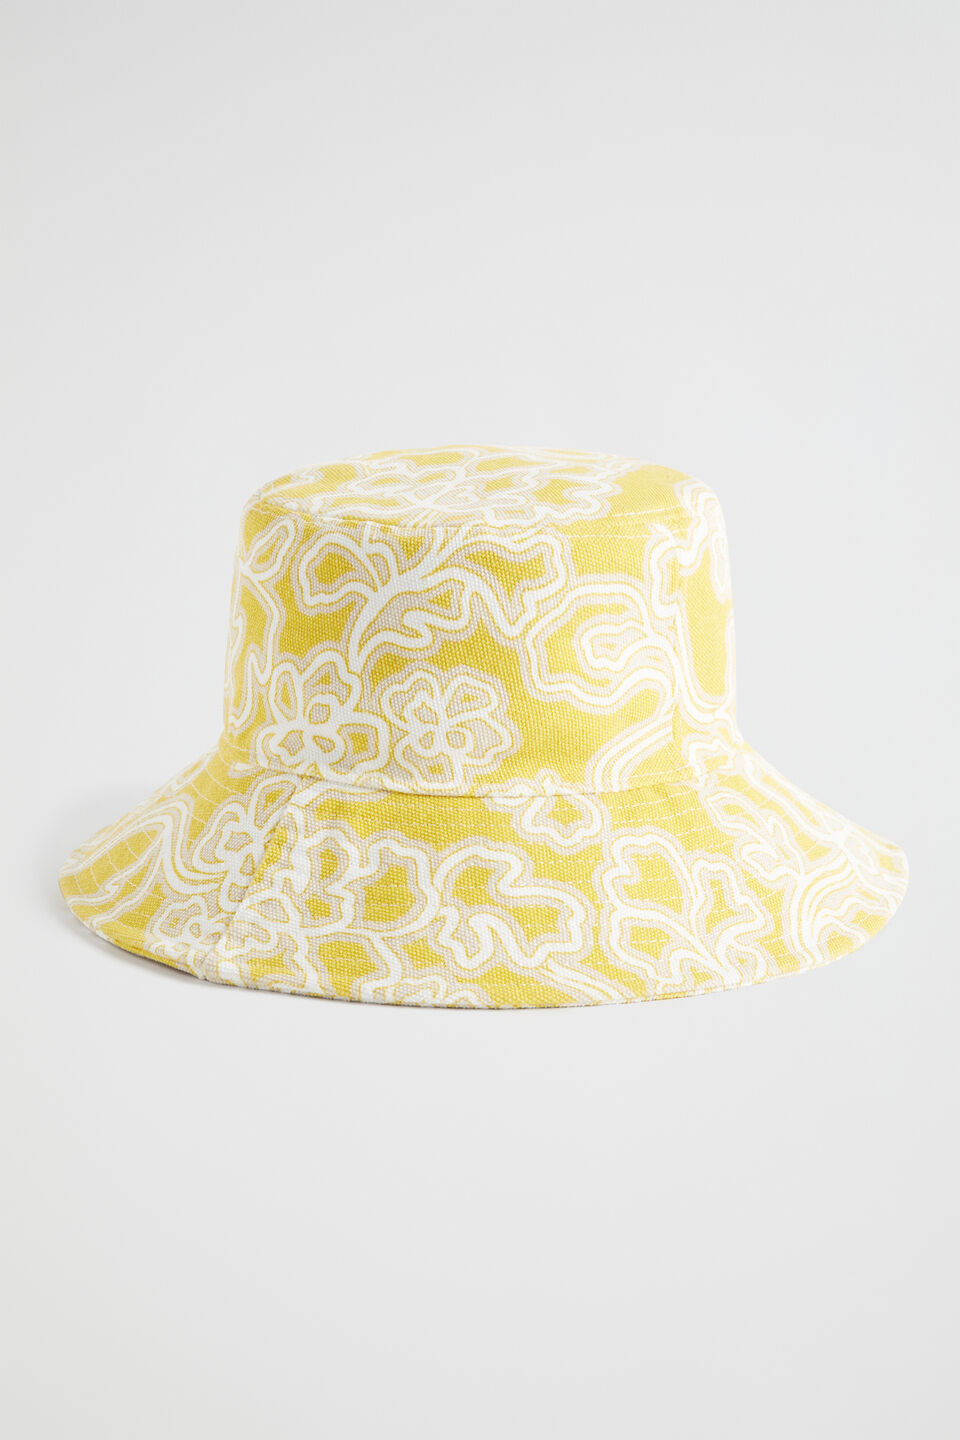 Seed Bucket Hat  Gold Amber Floral